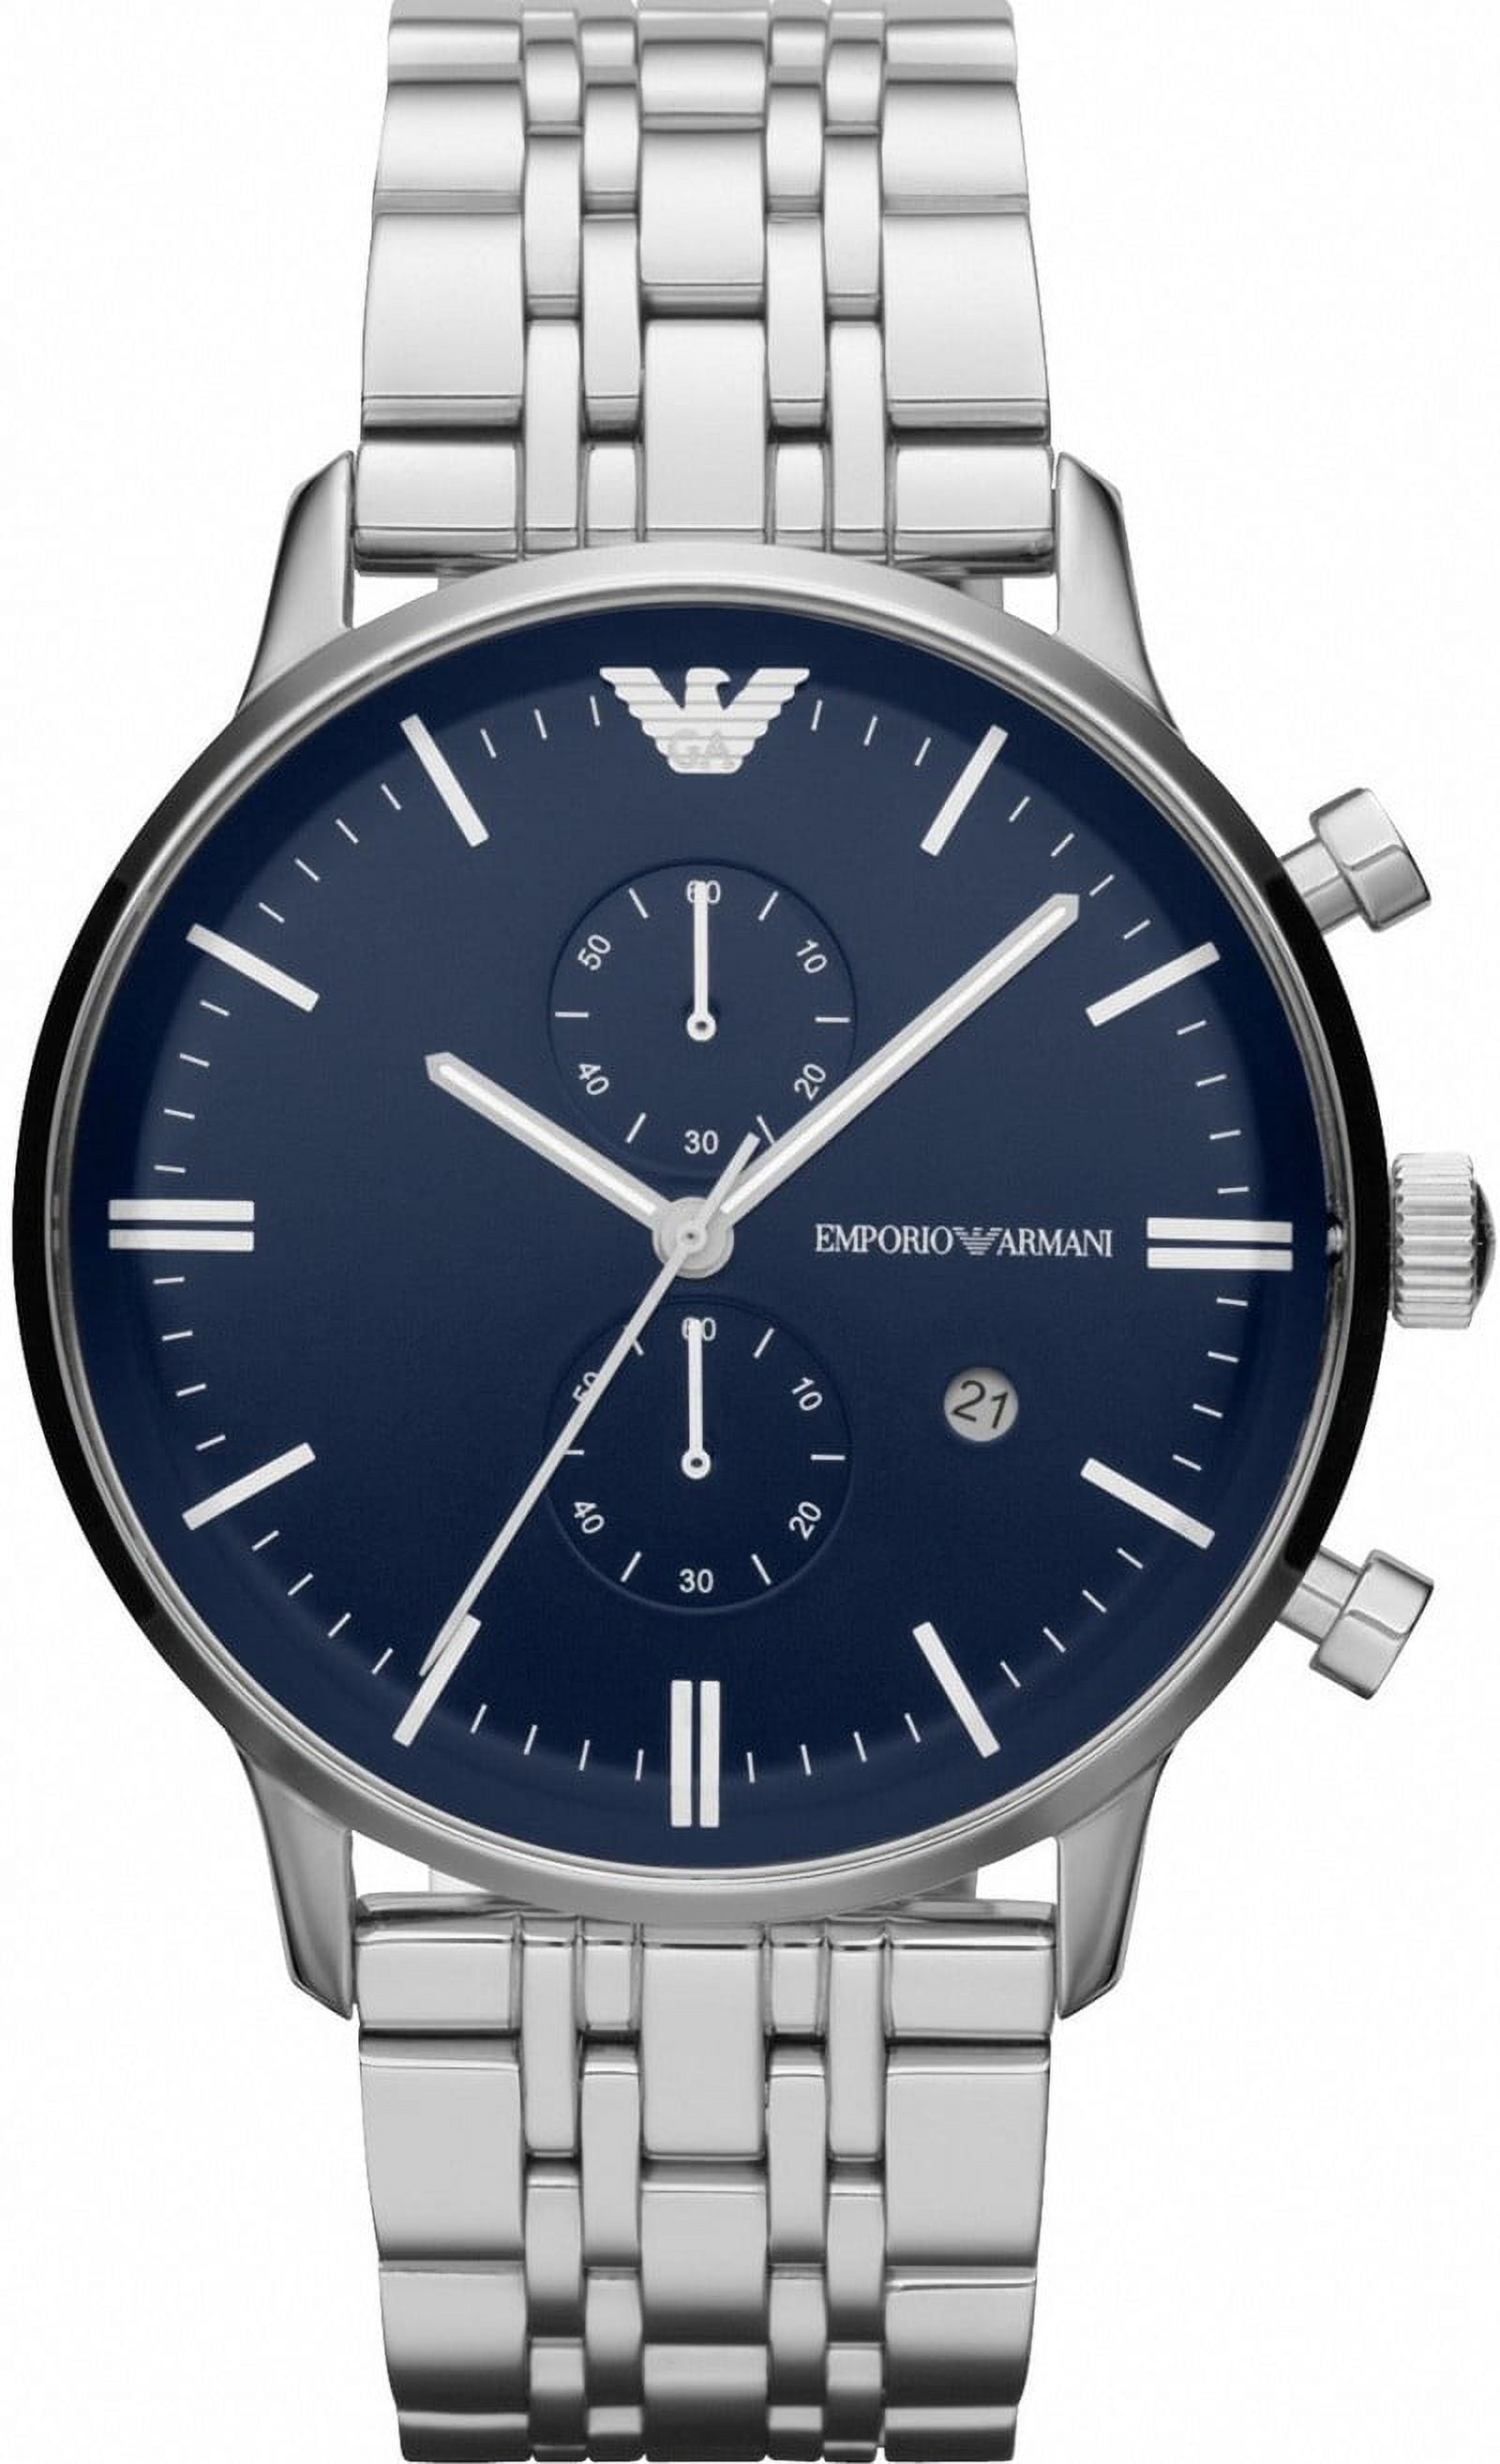 Emporio Armani Men's Watch with Bracelet Style Band